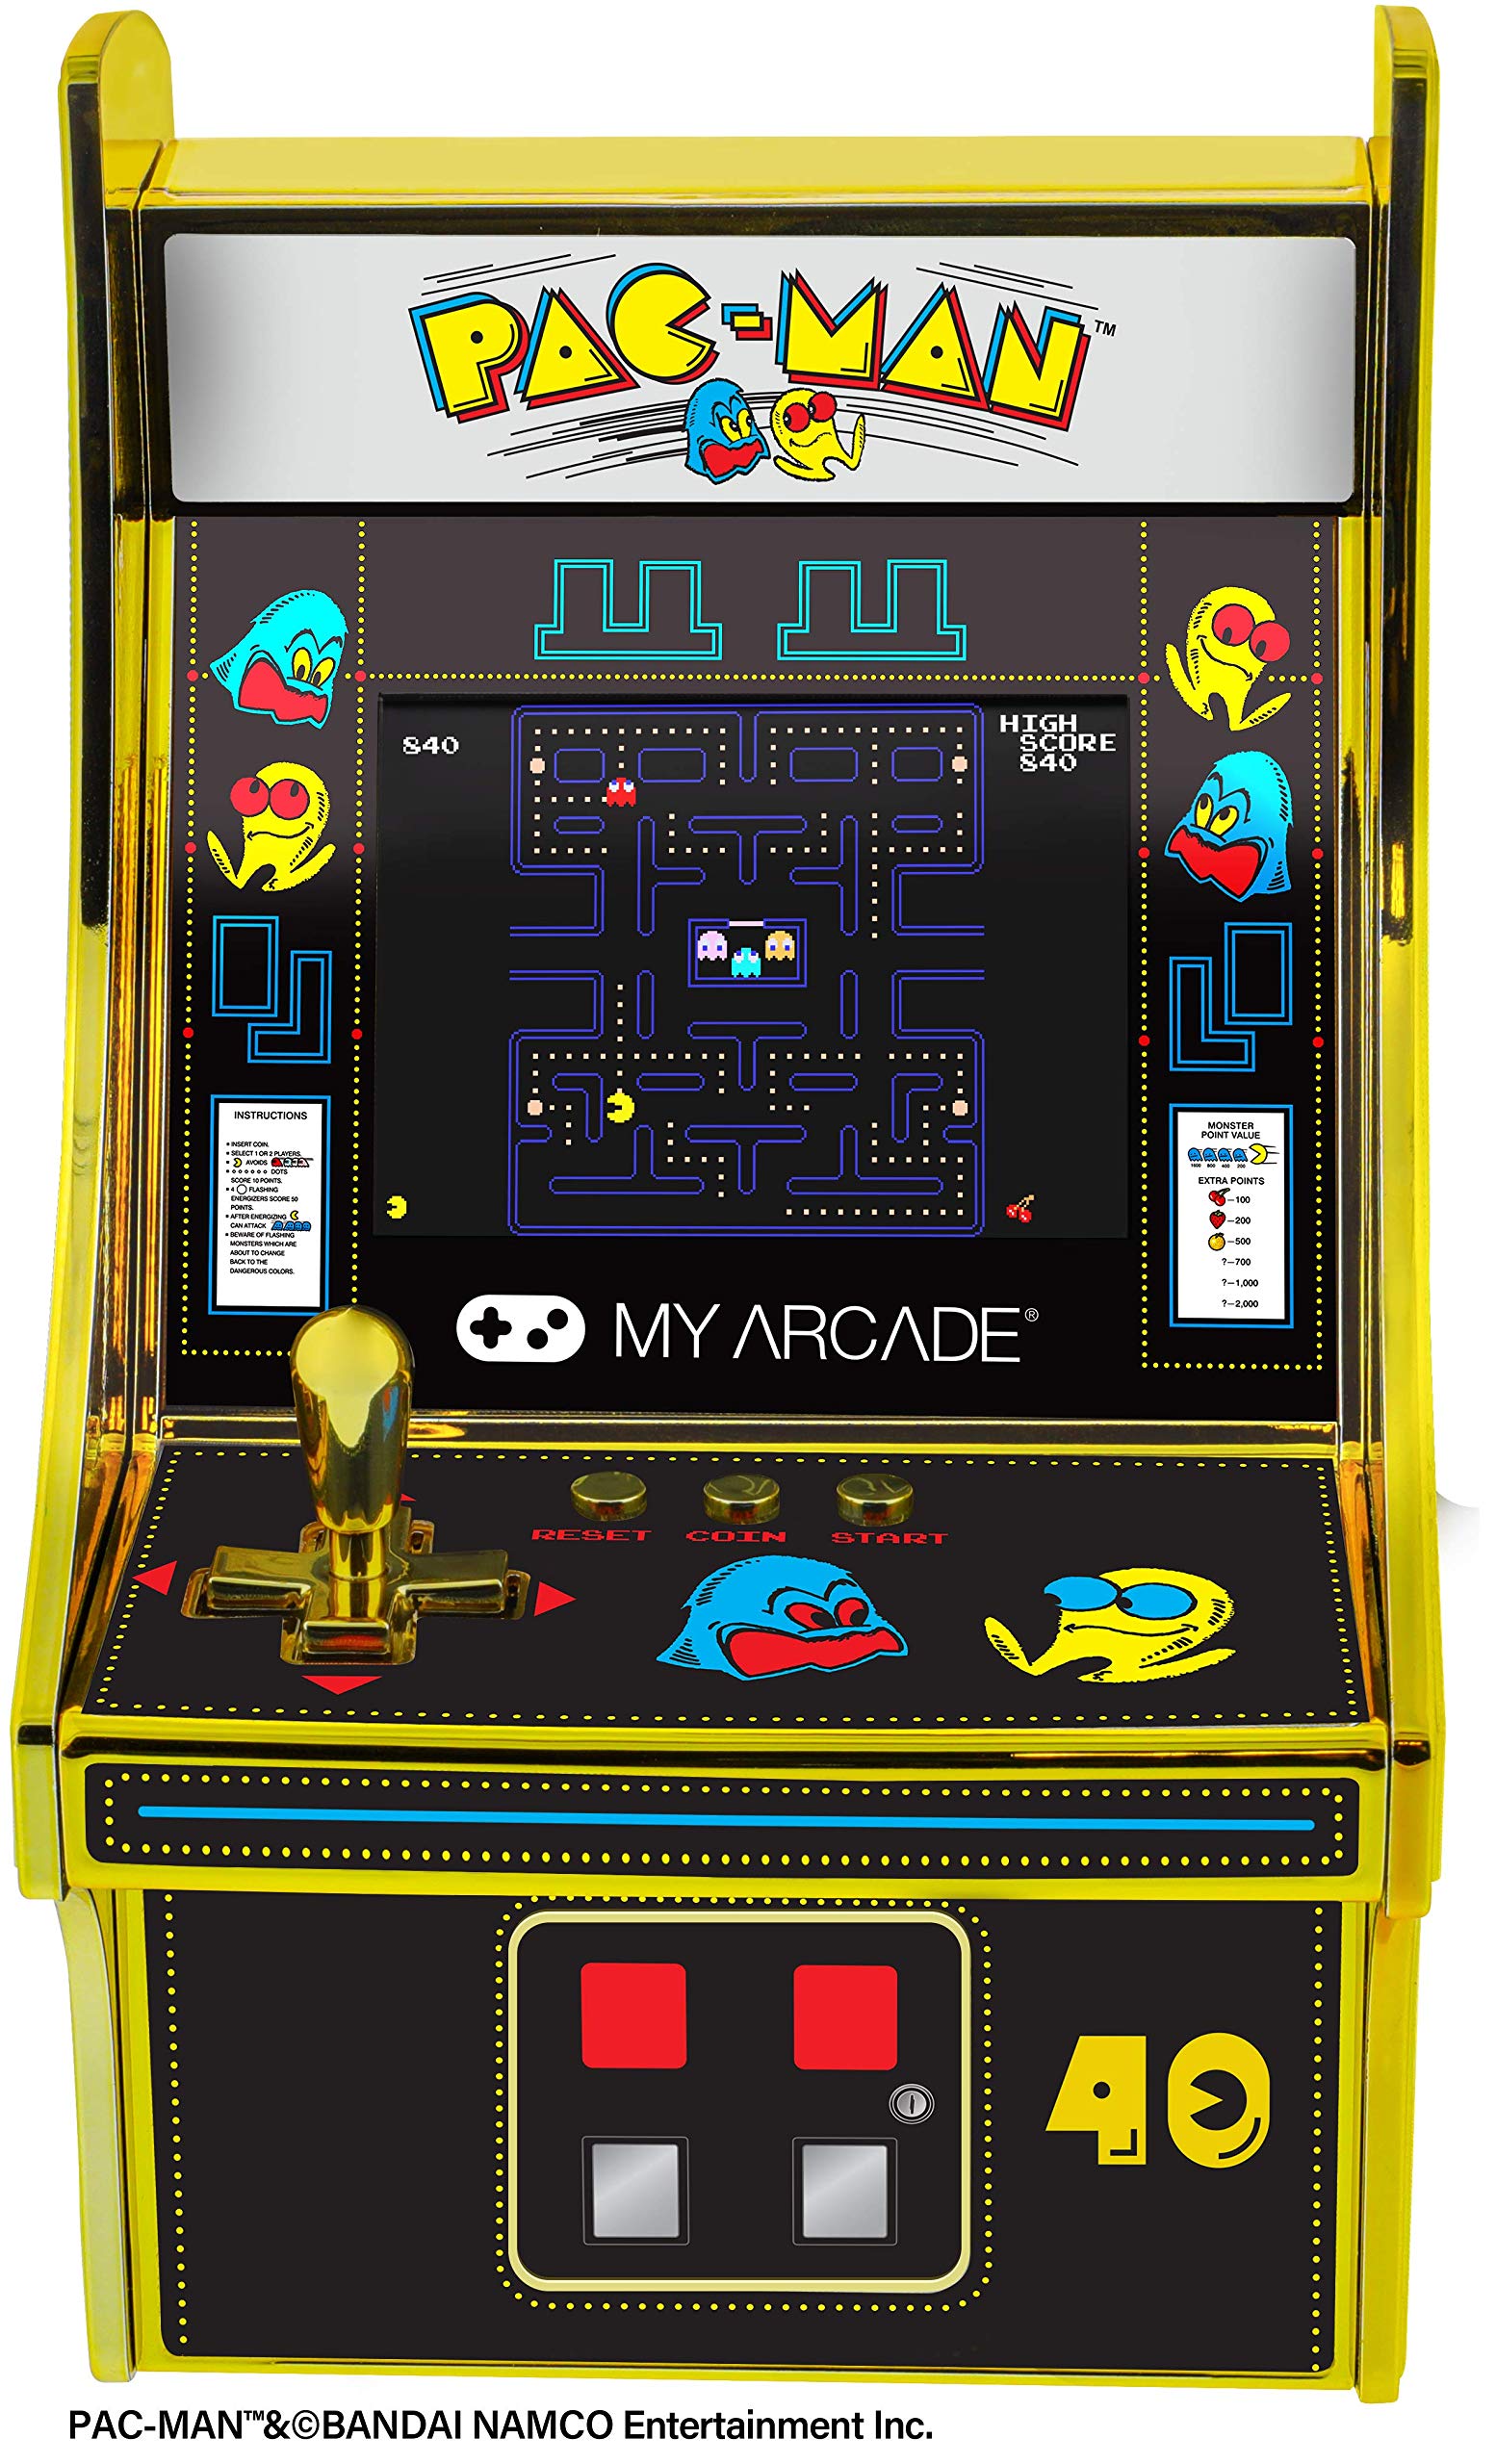 My Arcade Pac-Man 40th Anniversary Micro Player, Fully Playable, 6.75 Inch Collectible, Full Color, Gold Plated, Battery or Micro USB Powered (DGUNL-3290), yellow